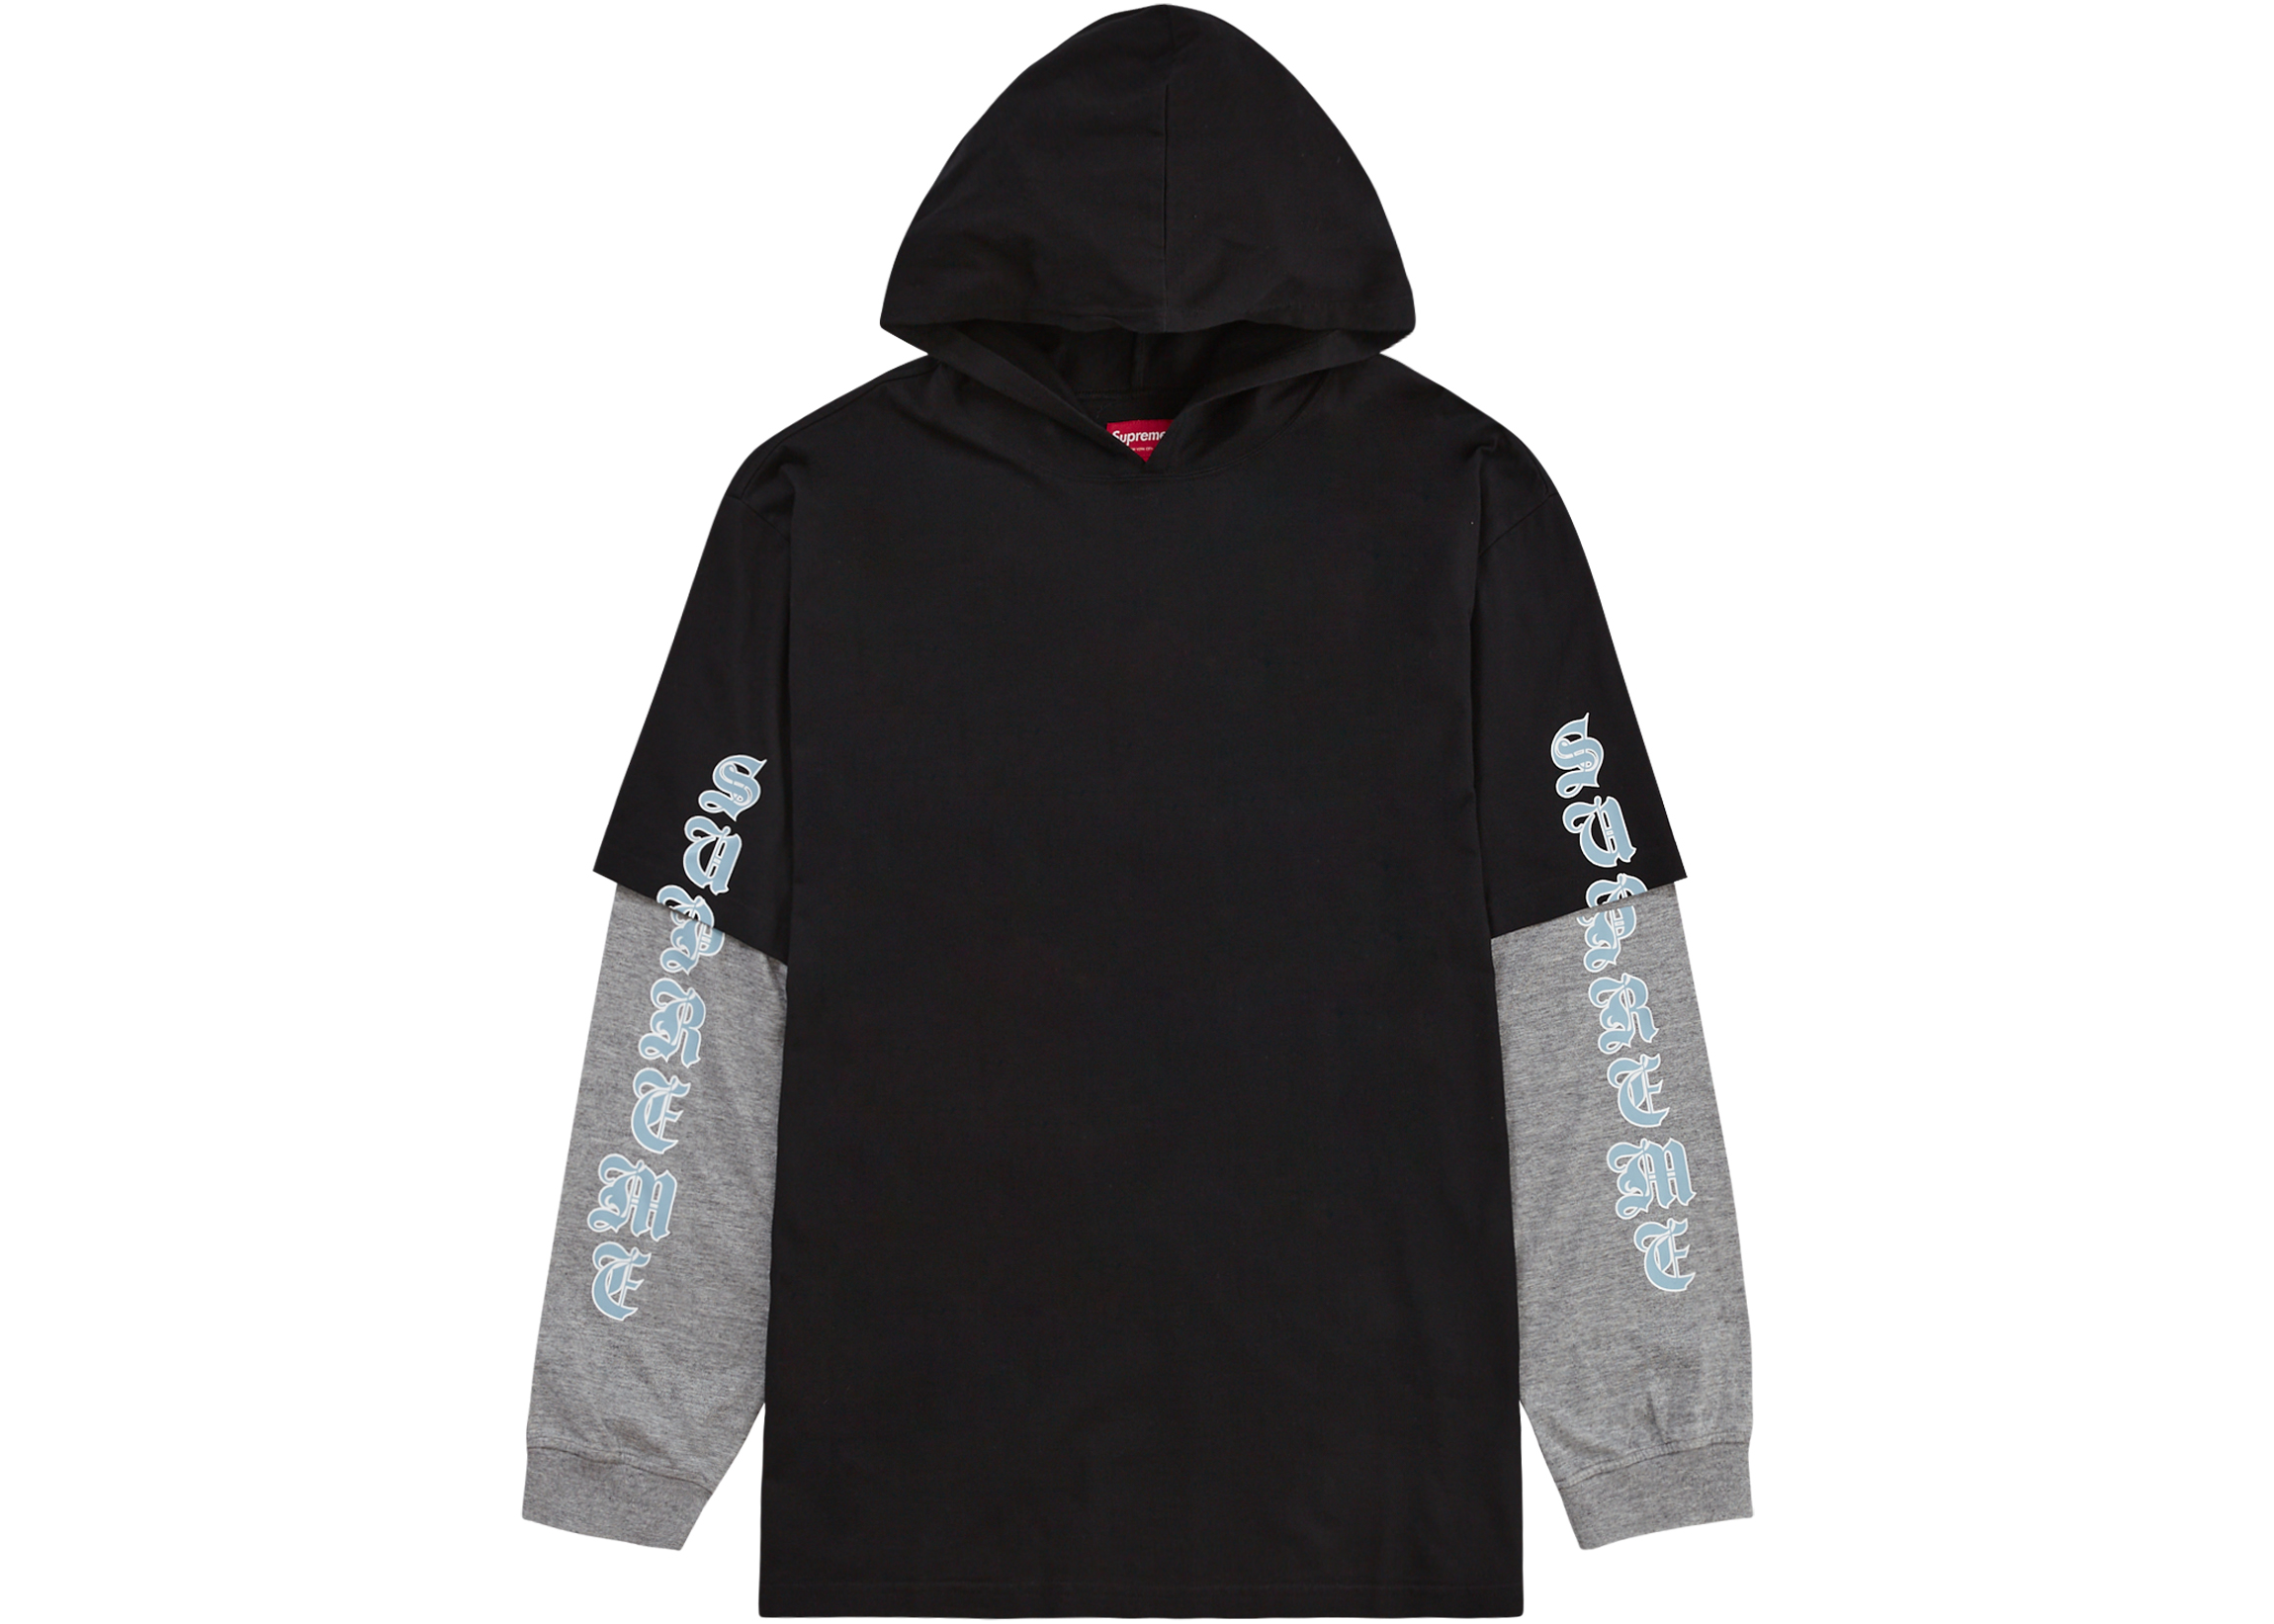 Supreme Layered Hooded L/S Top Black